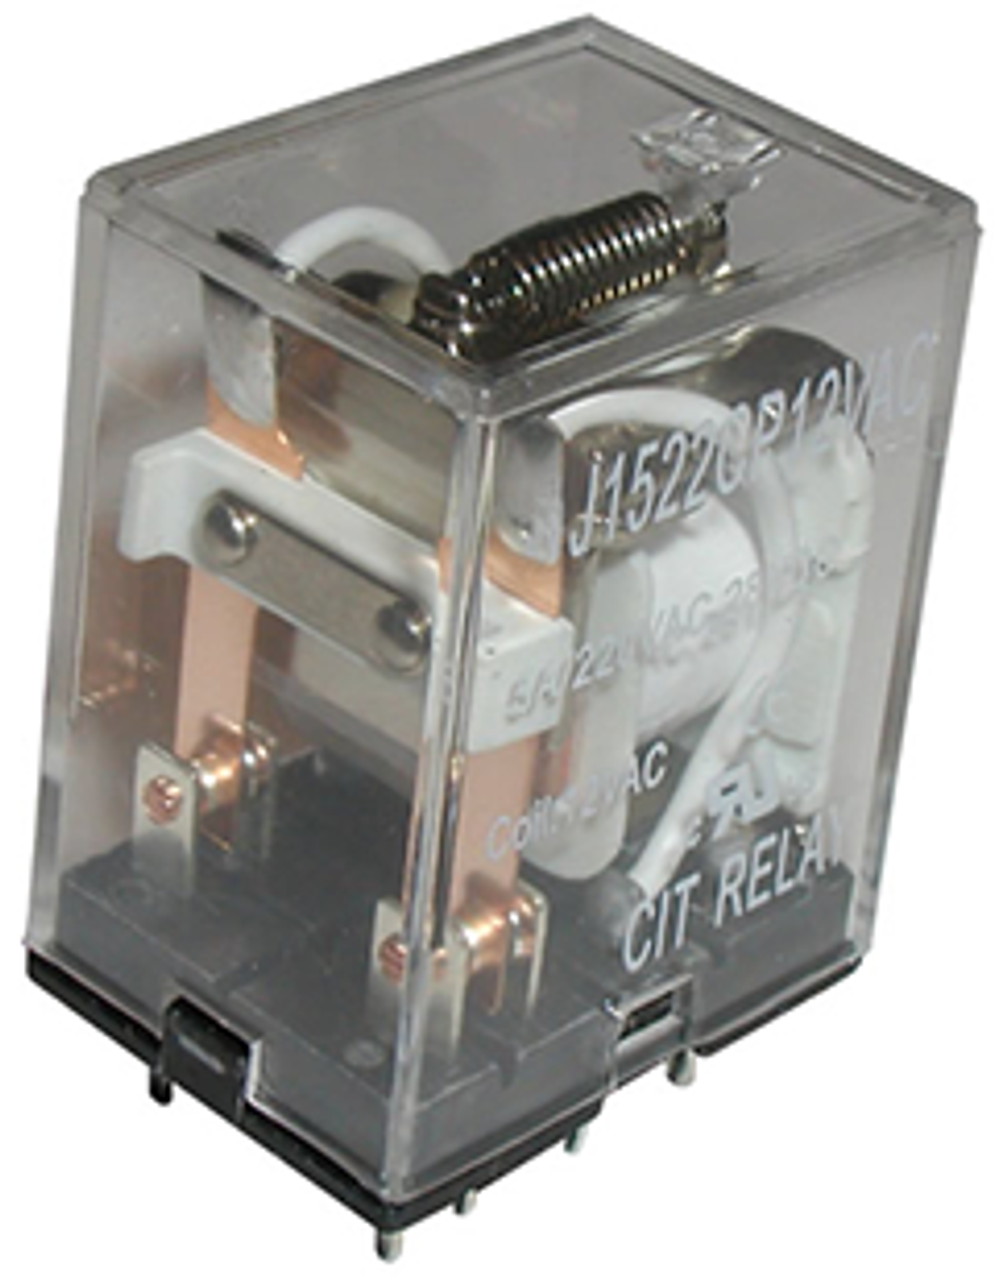 CIT Relay and Switch J1523CT24VDC Industrial Relays